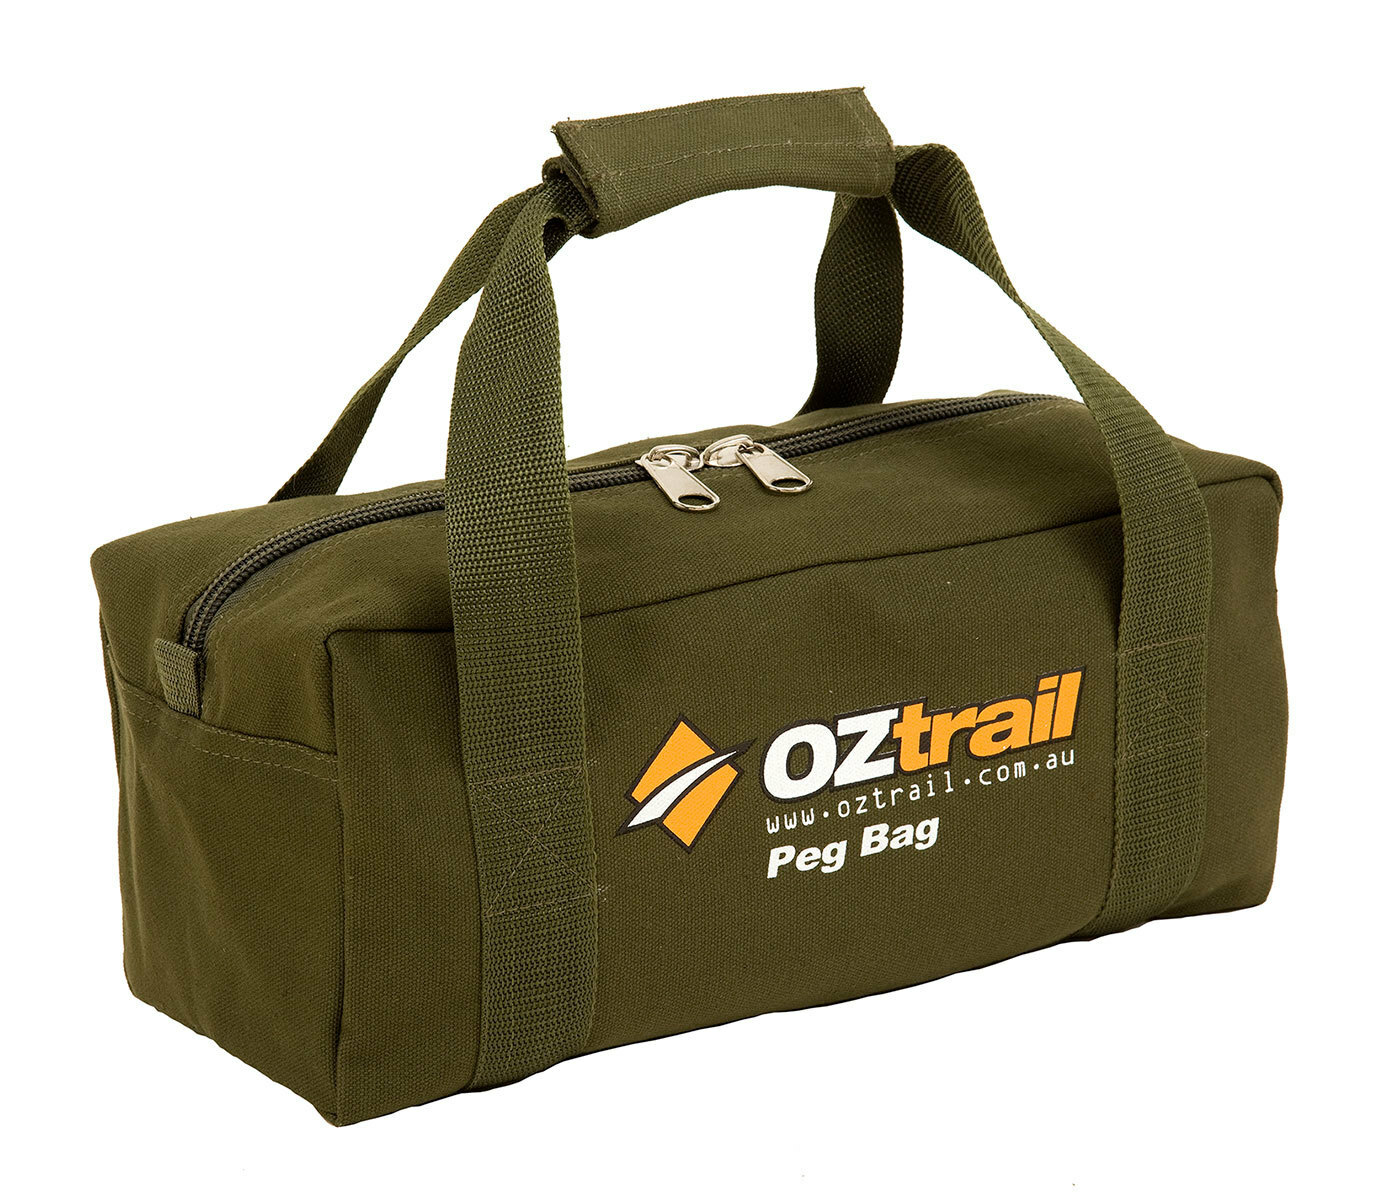 Buy Camping Gear Online Storage OZtrail Canvas Tent Peg Bag